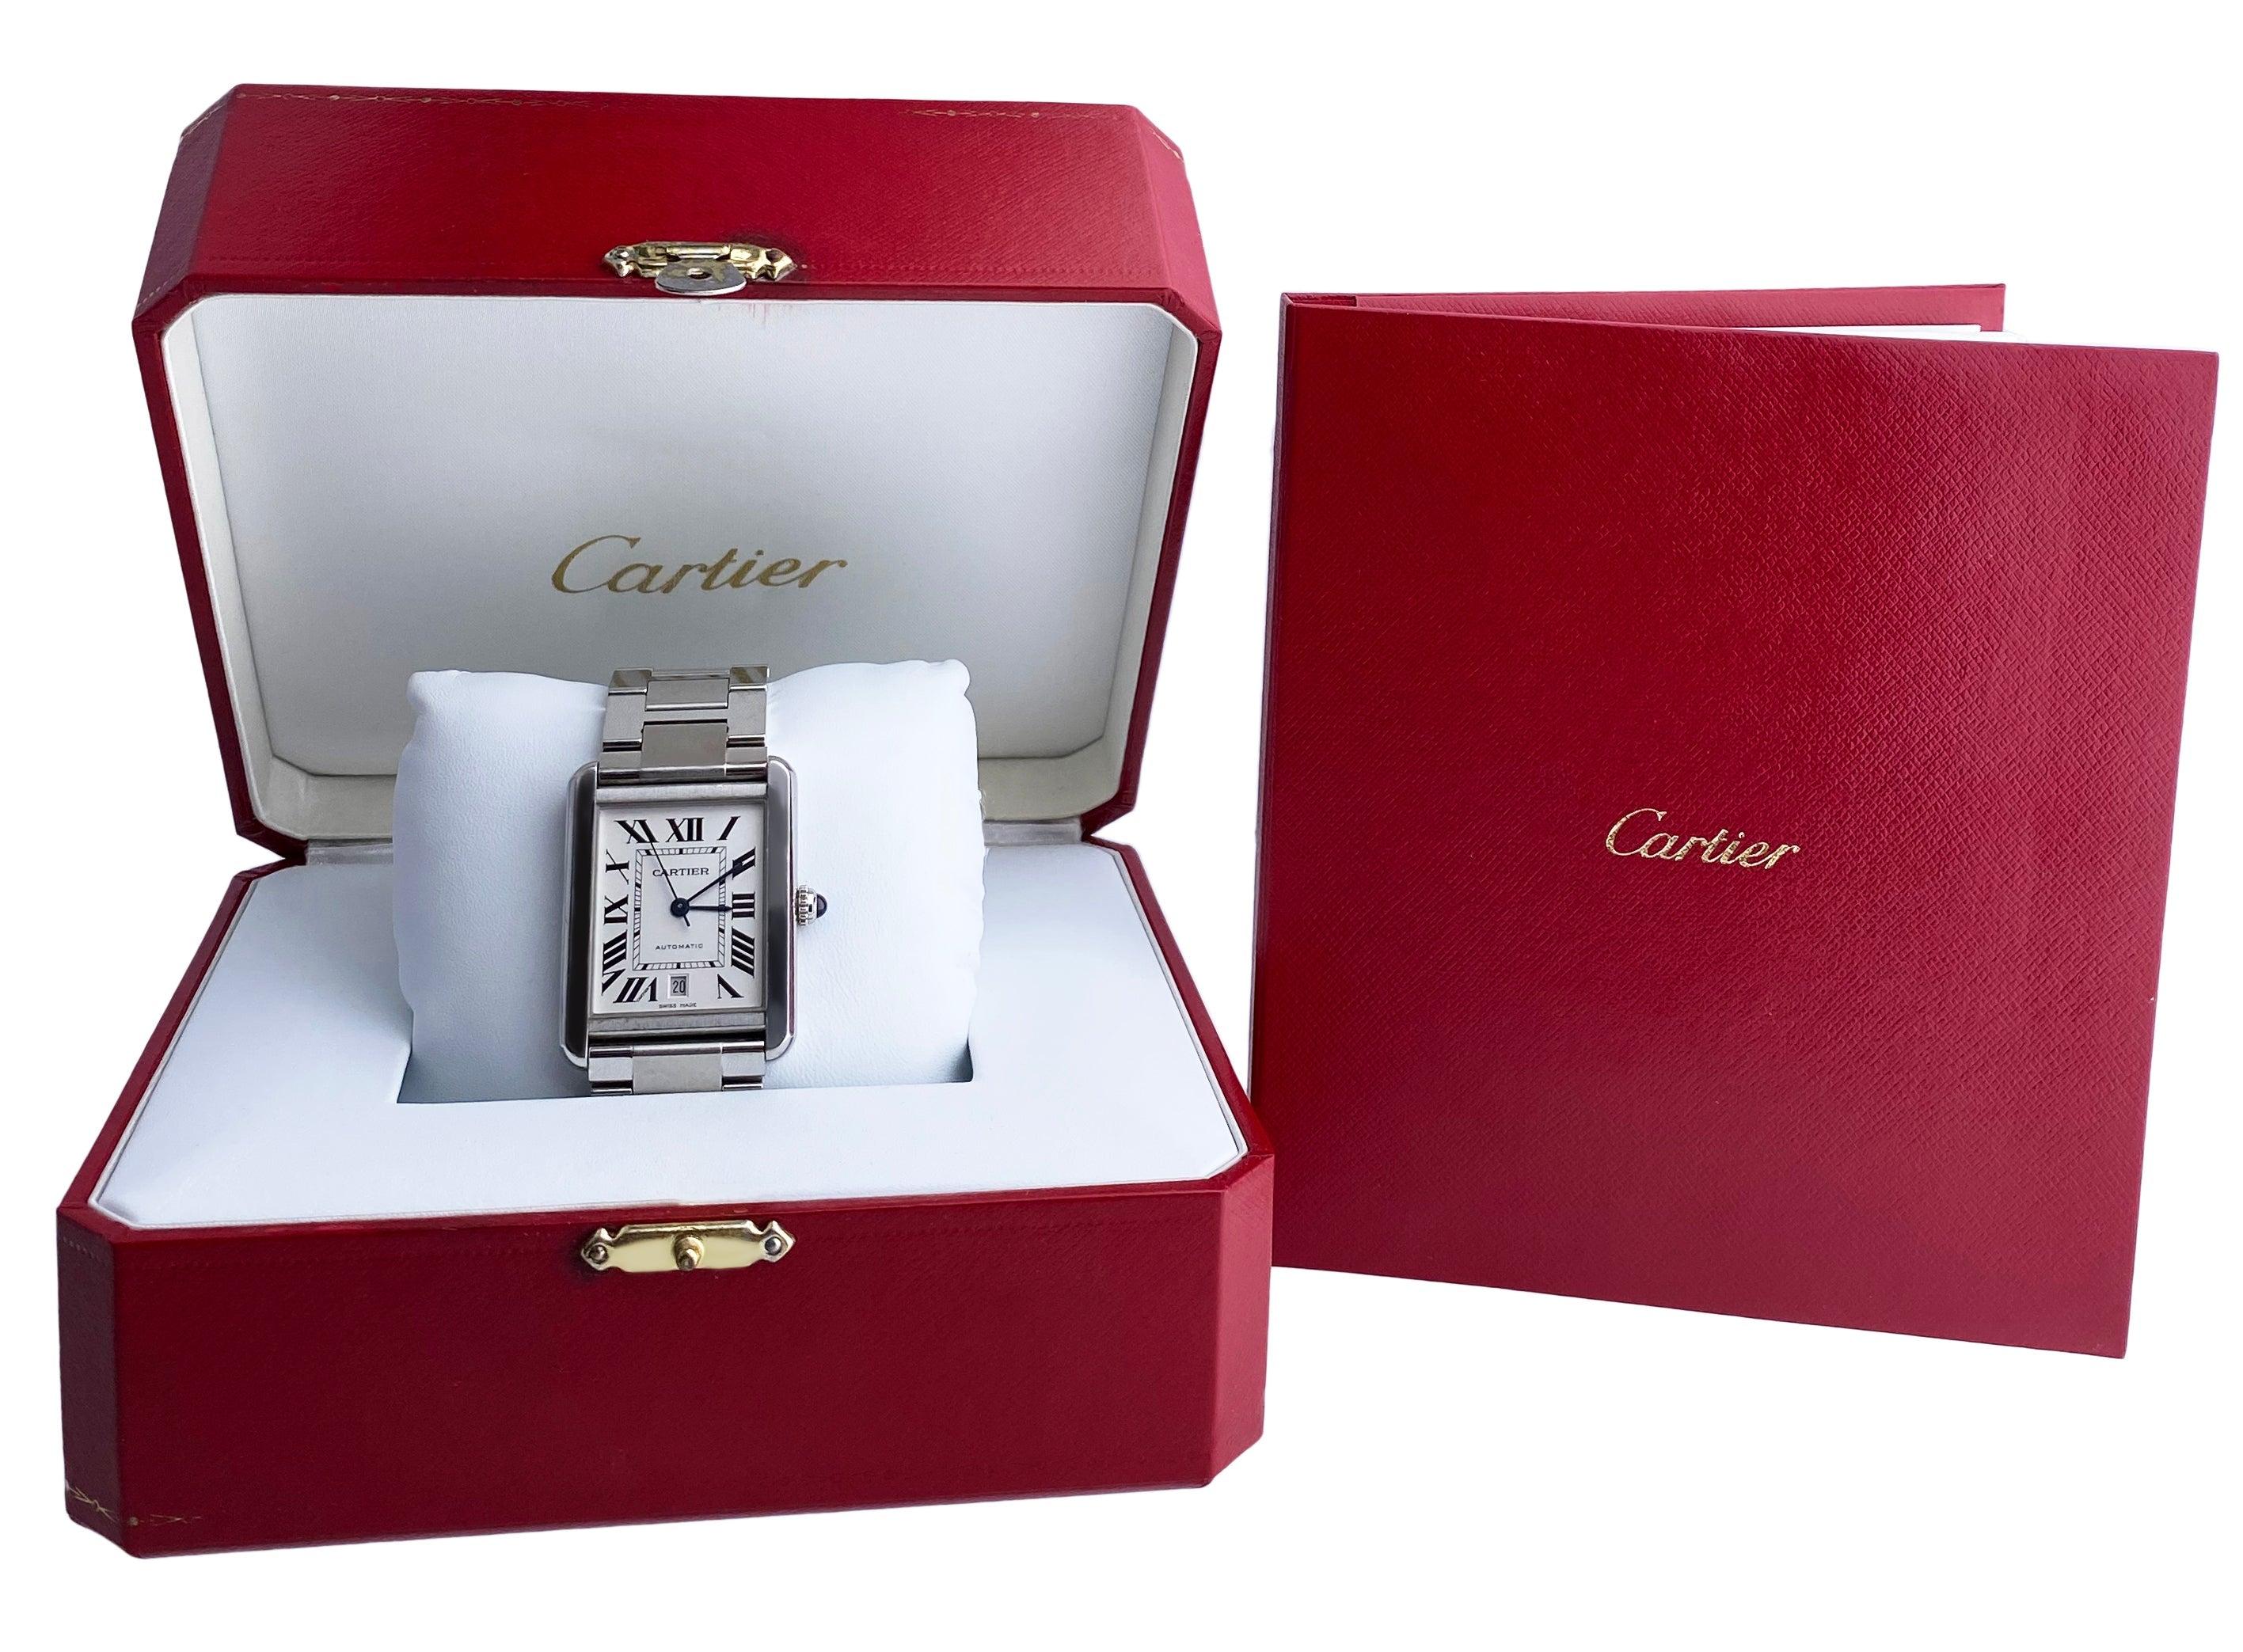 
Cartier Tank Solo XL 3800 Men's Watch. 31mm stainless steel case with smooth stainless steel bezel. Silvered opaline dial with blue steel hands and Roman numeral hour markers. Minute markers around an inner ring. Date display at the 6 o'clock